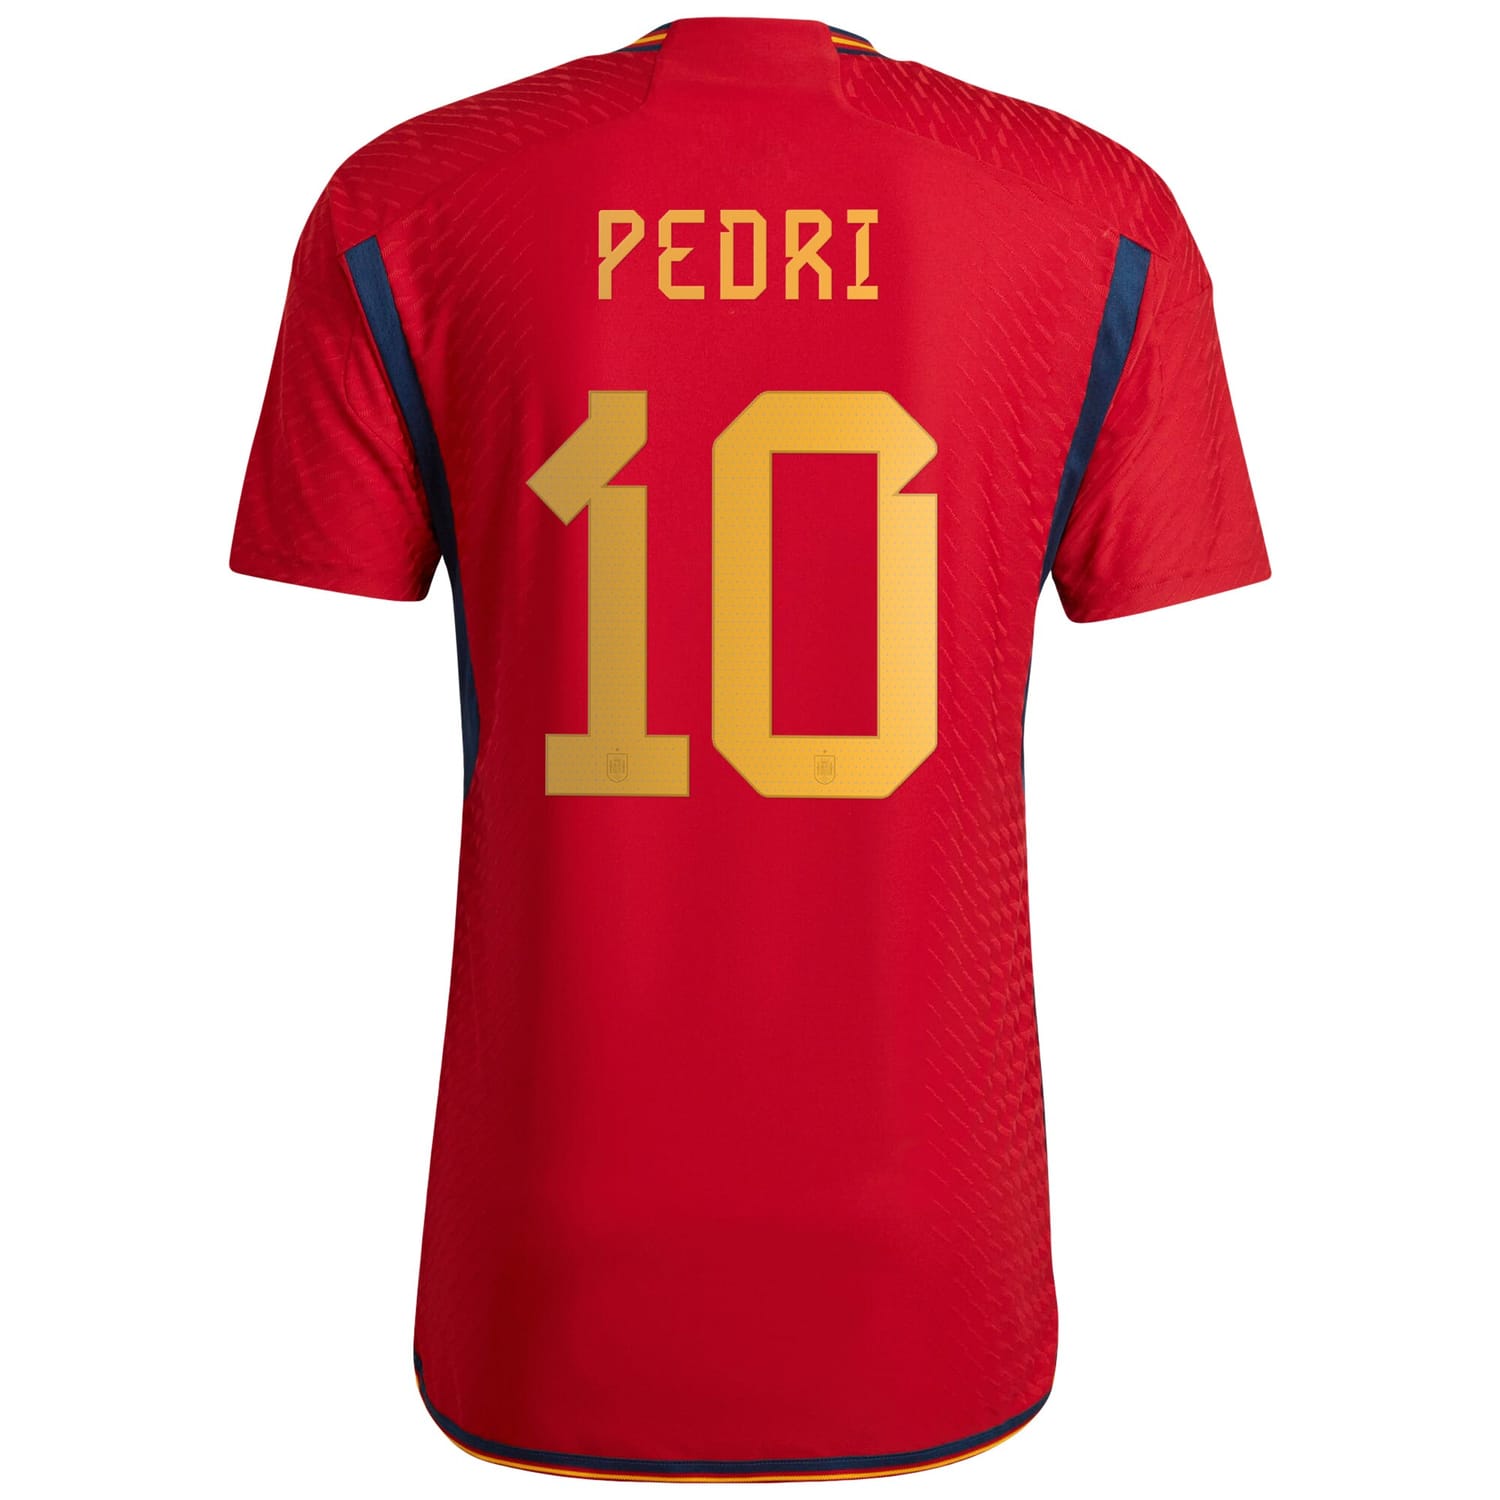 Spain National Team Home Authentic Jersey Shirt Red 2022-23 player Pedri printing for Men